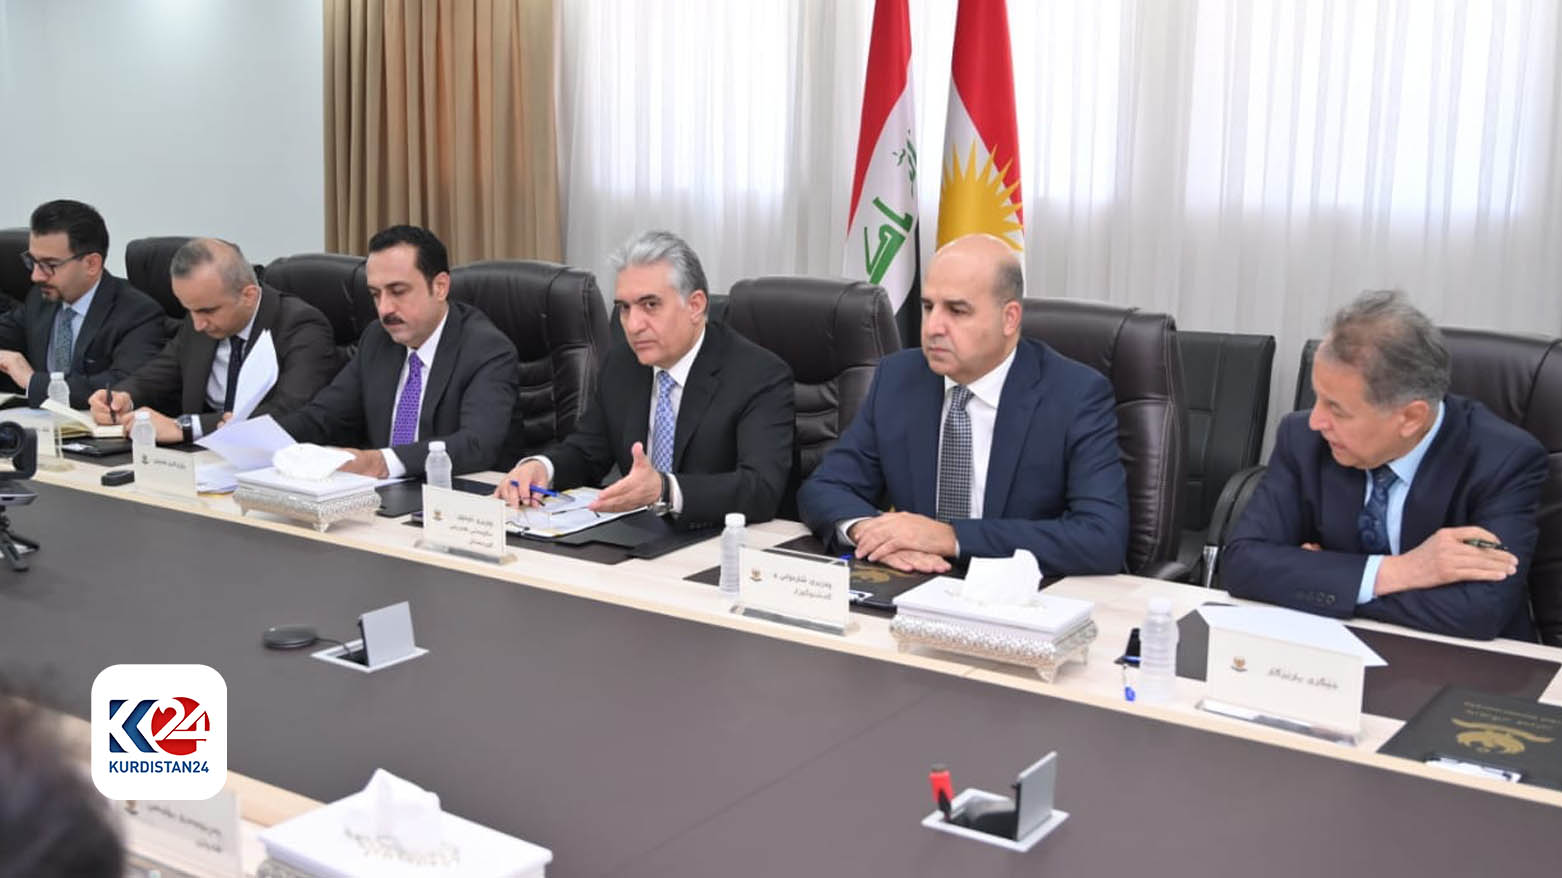 Interior Minister Rebar Ahmed, Municipalities Minister Sasan Awni, Erbil Governor Omed Khoshnawm, and other officials during the meeting. (Photo: Kurdistan 24)